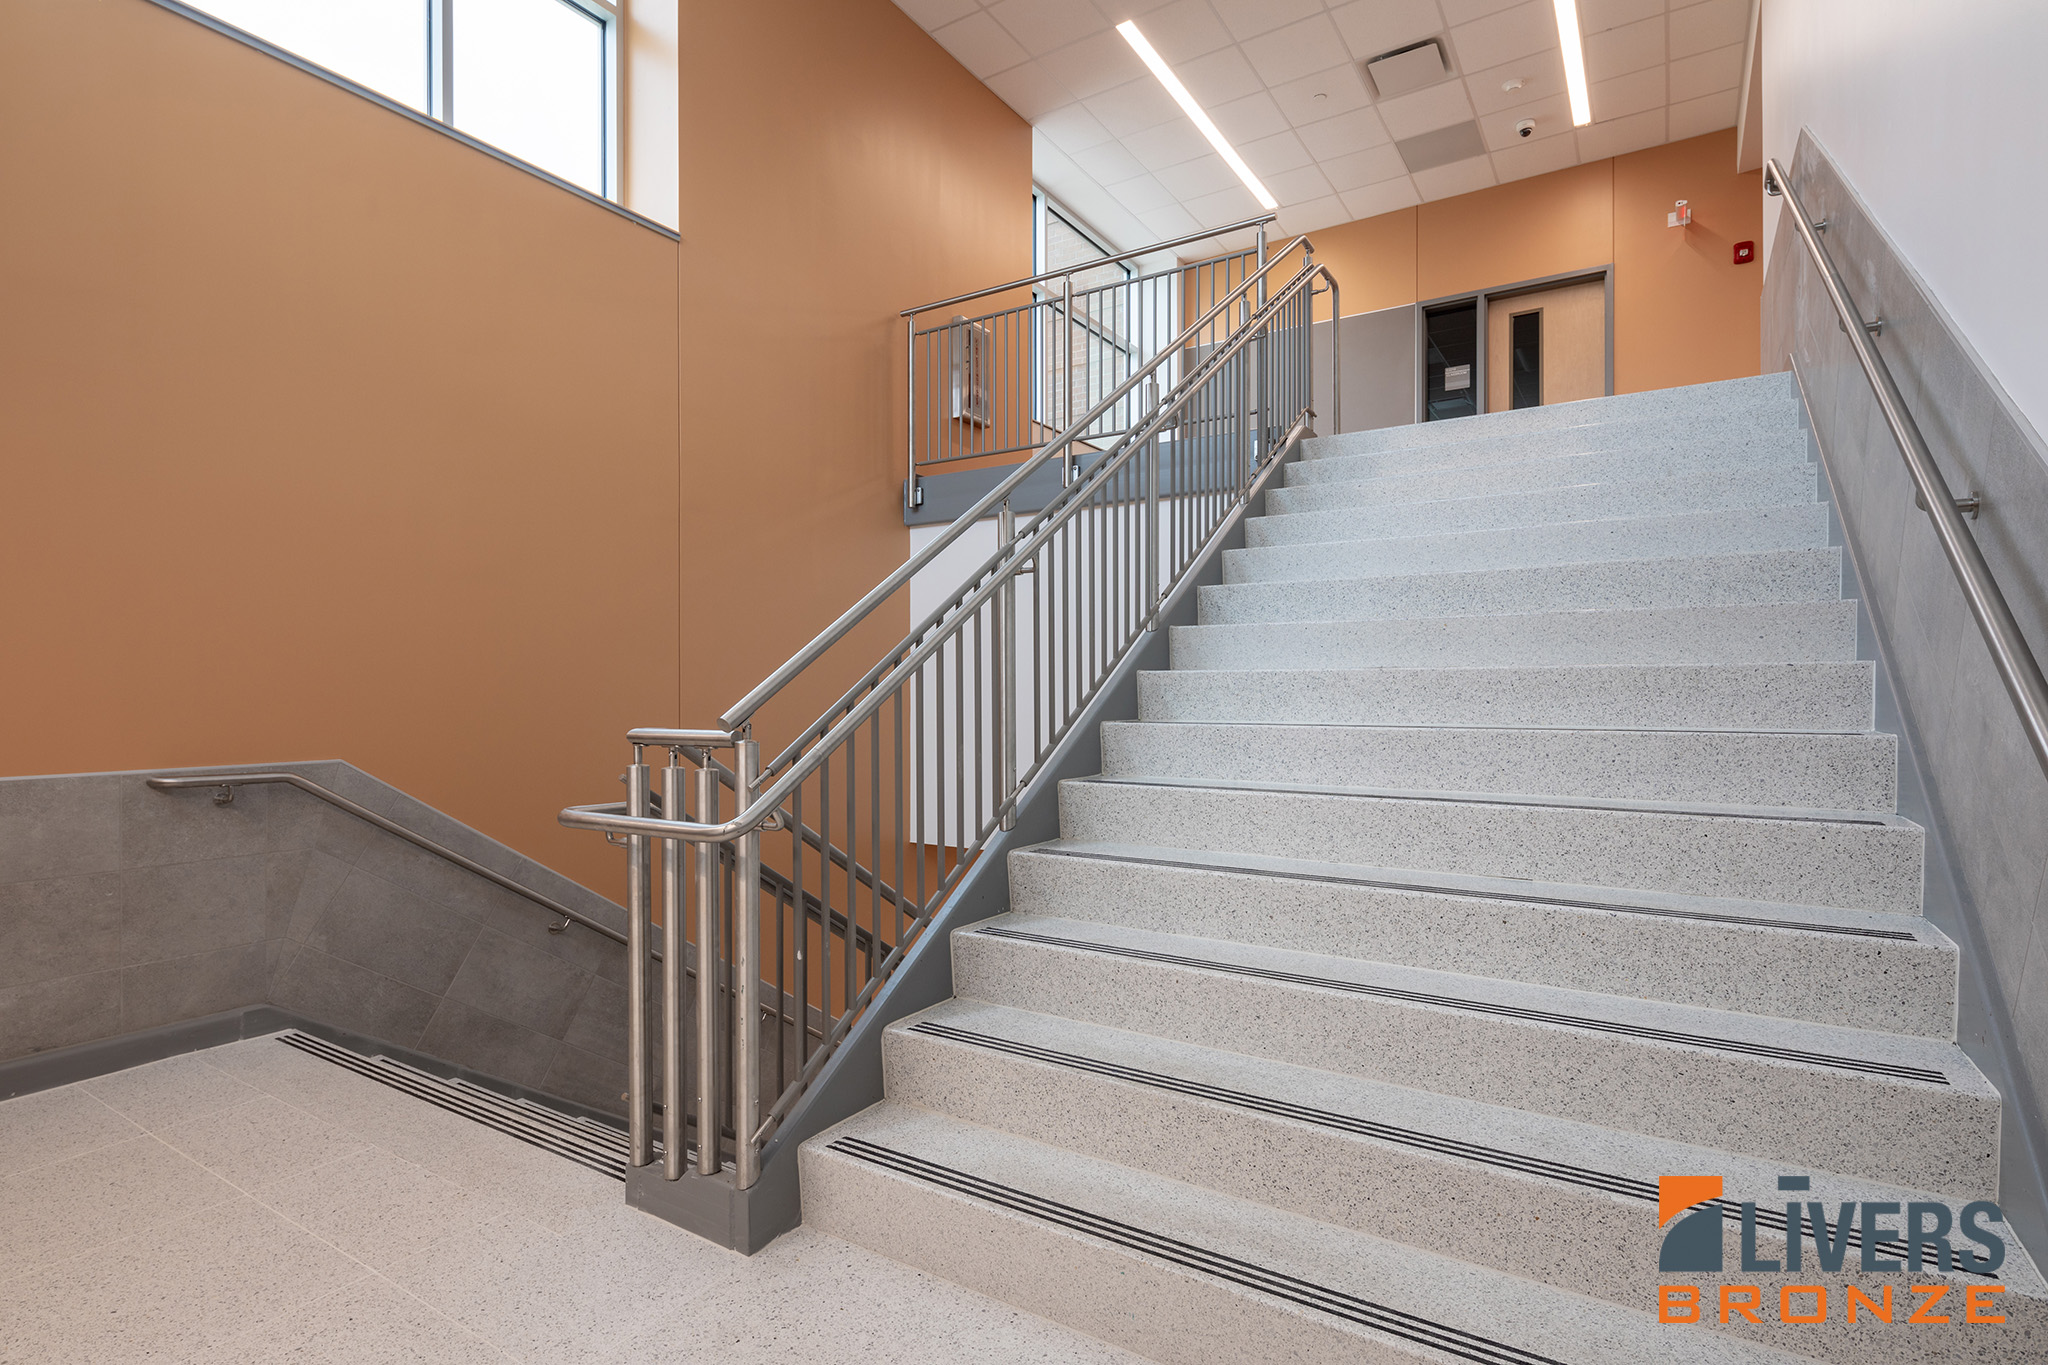 Livers Bronze Mirage with Stainless Steel Picket Railings were installed in the interior stairway at Red Bud Elementary School, Austin, Texas, and are Made in the USA